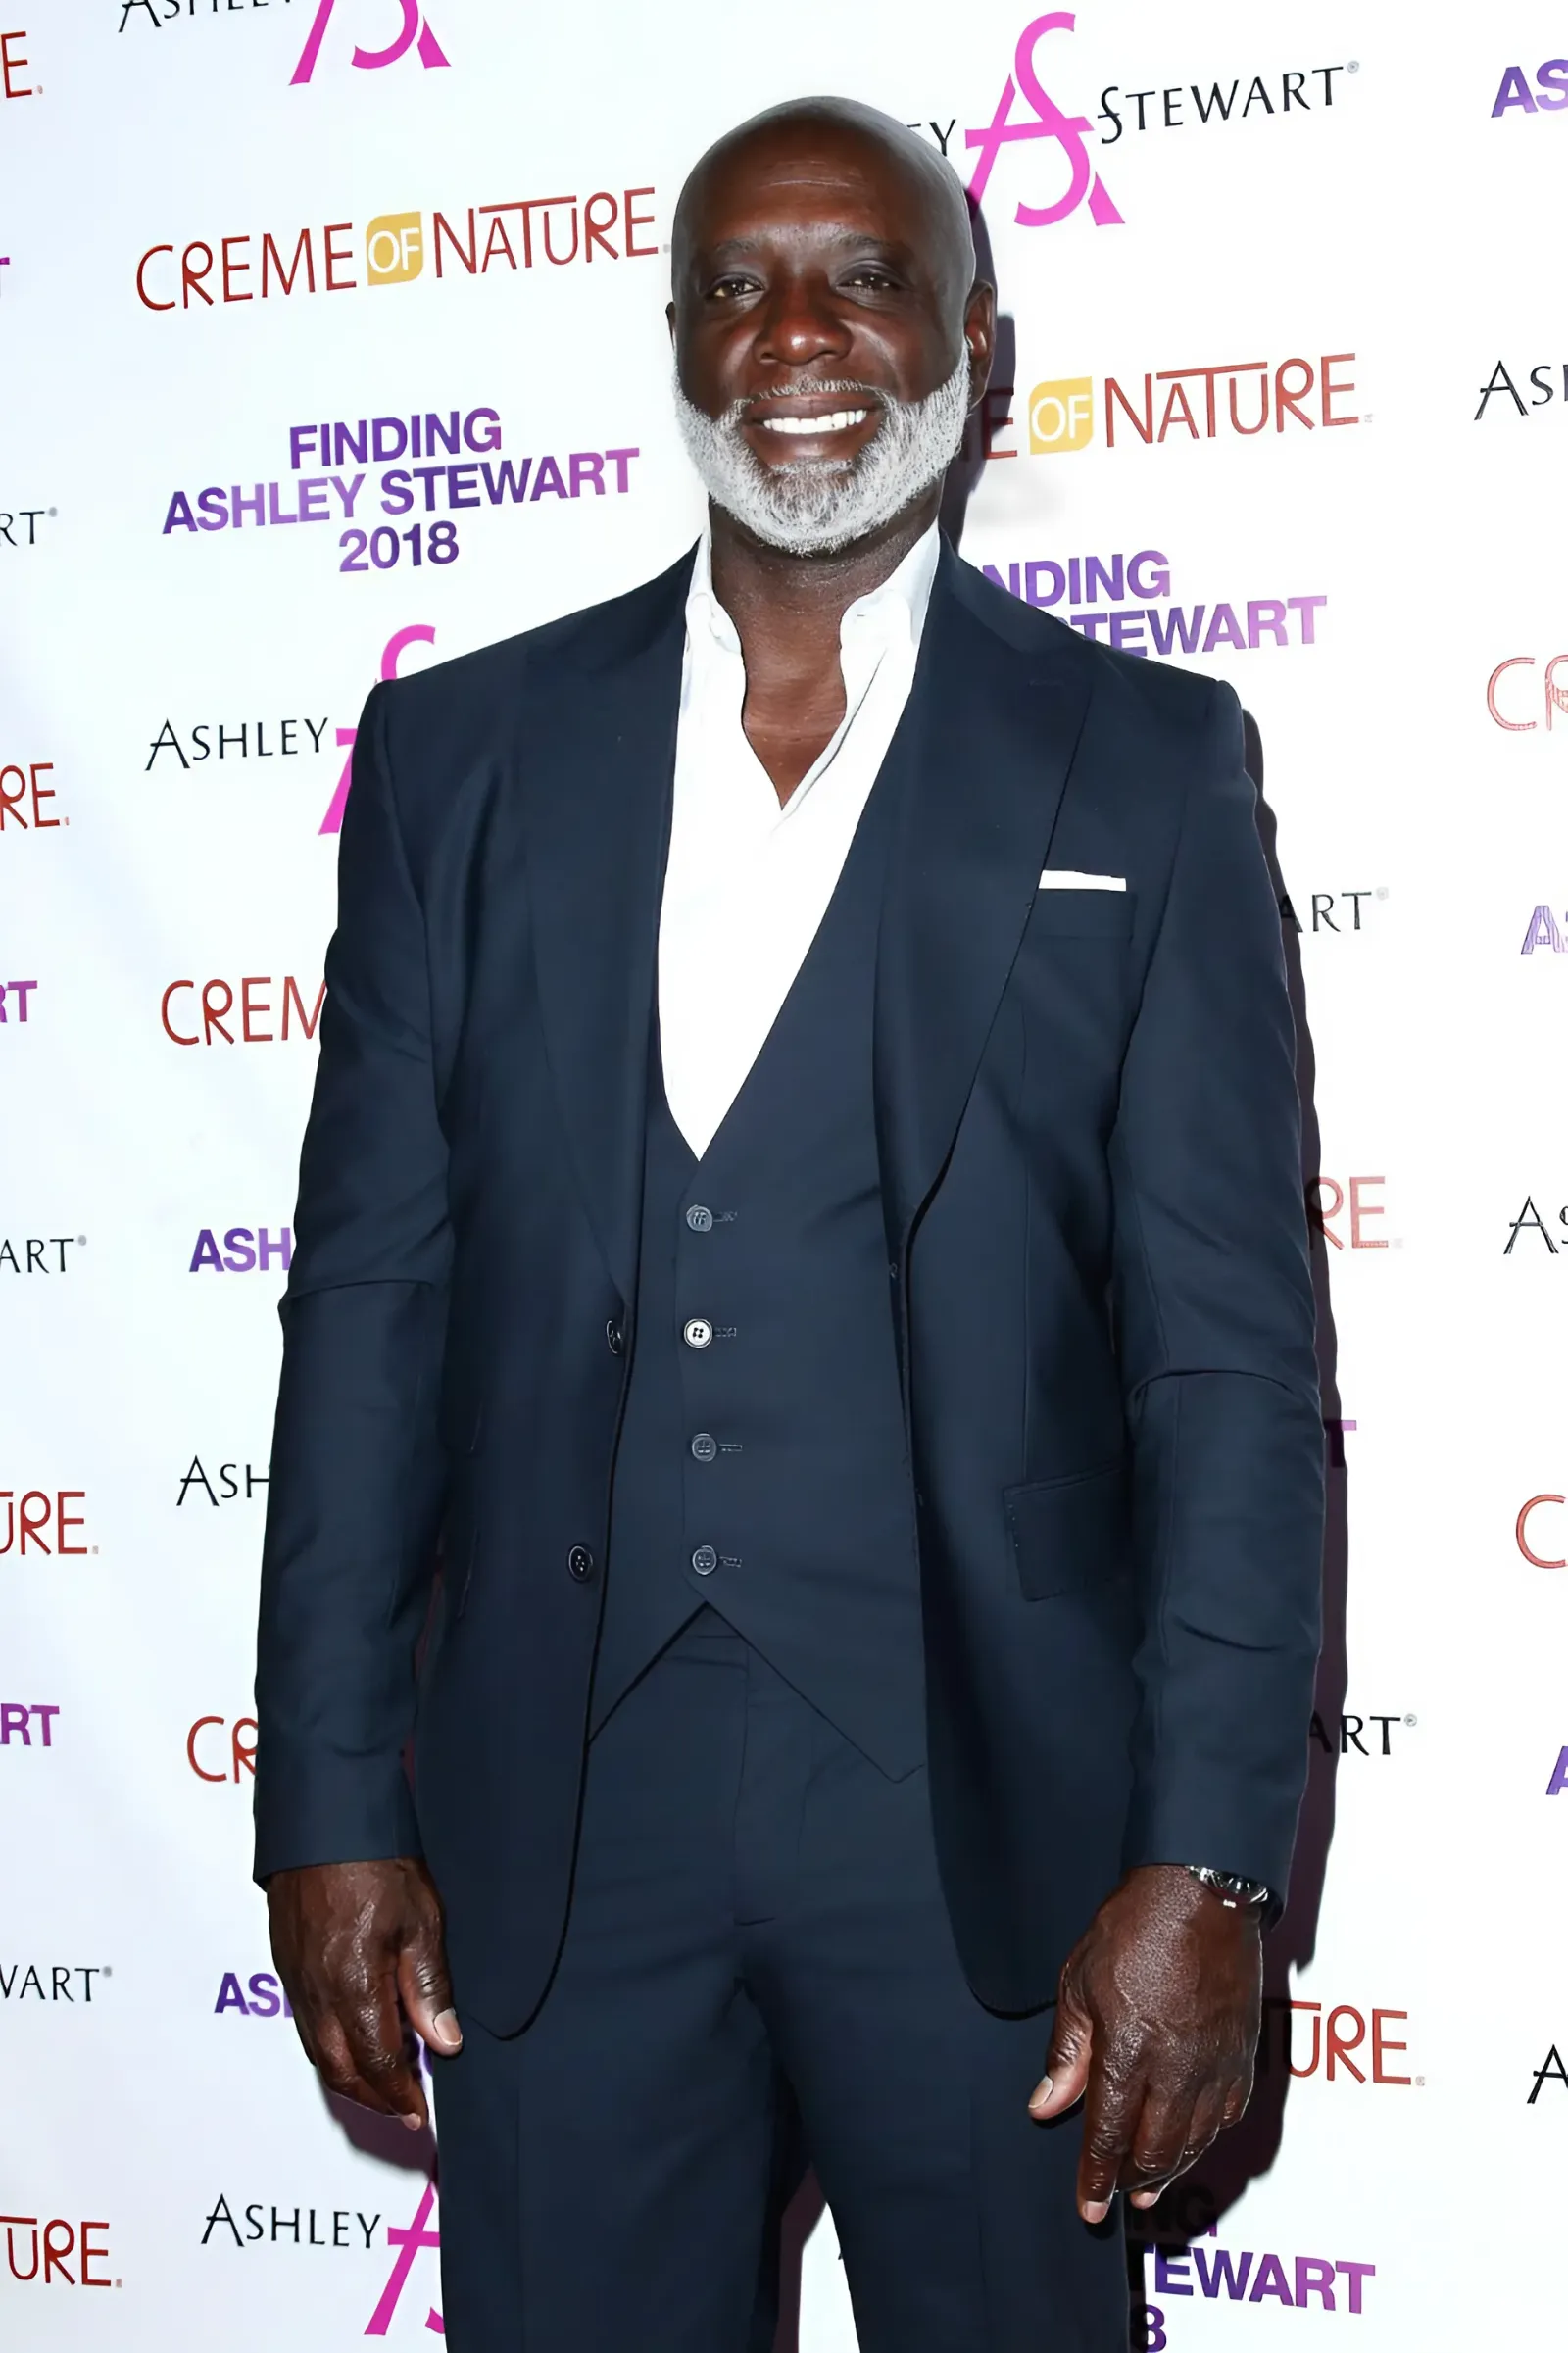 RHOA Alum Peter Thomas Facing Up to 5 Years in Prison Over Unpaid Taxes in the Millions as He Speaks Out After Taking Plea Deal